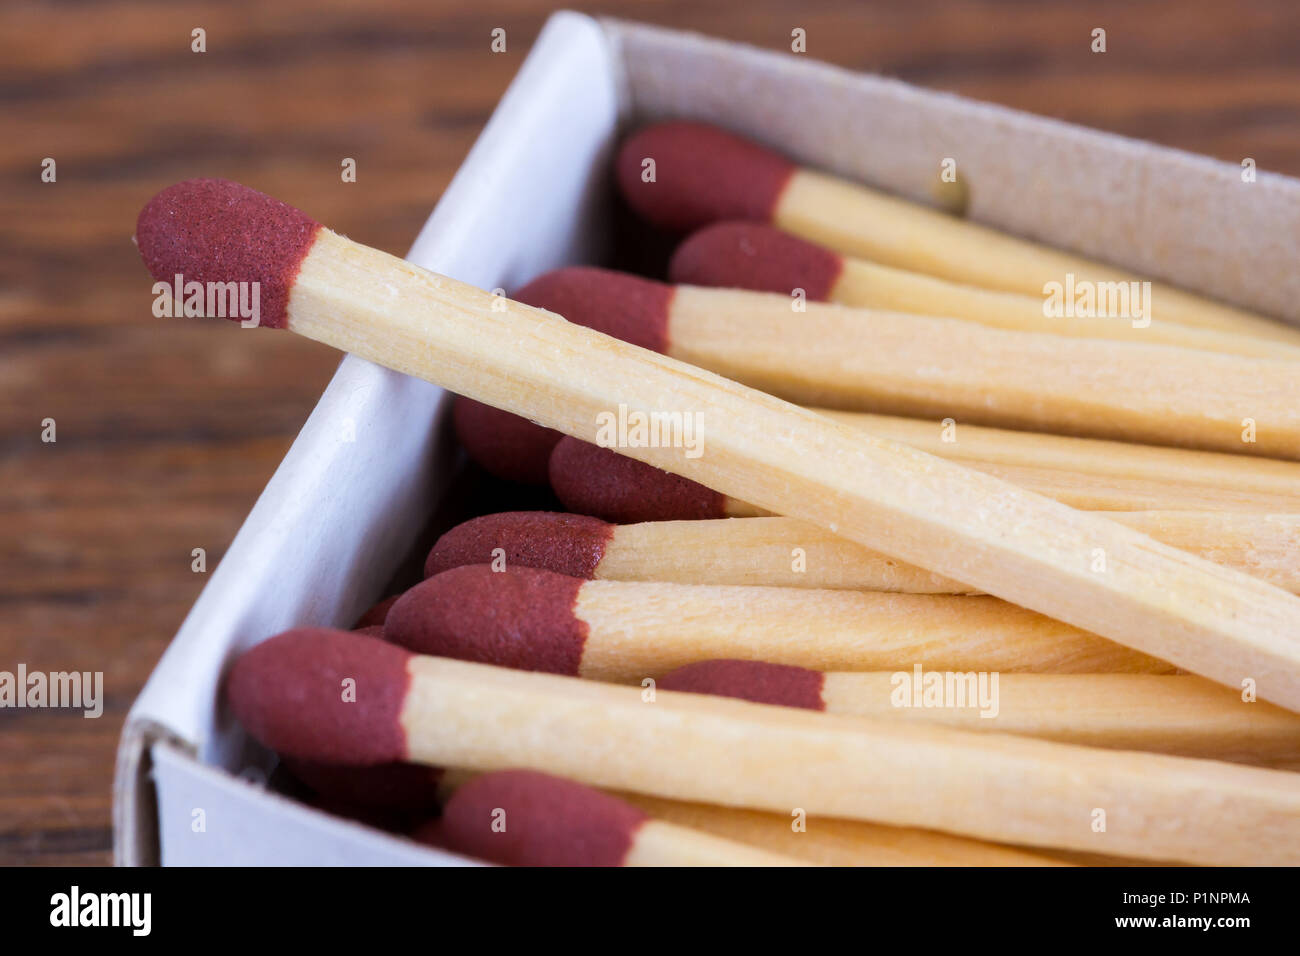 Close up of an open box of matches Stock Photo